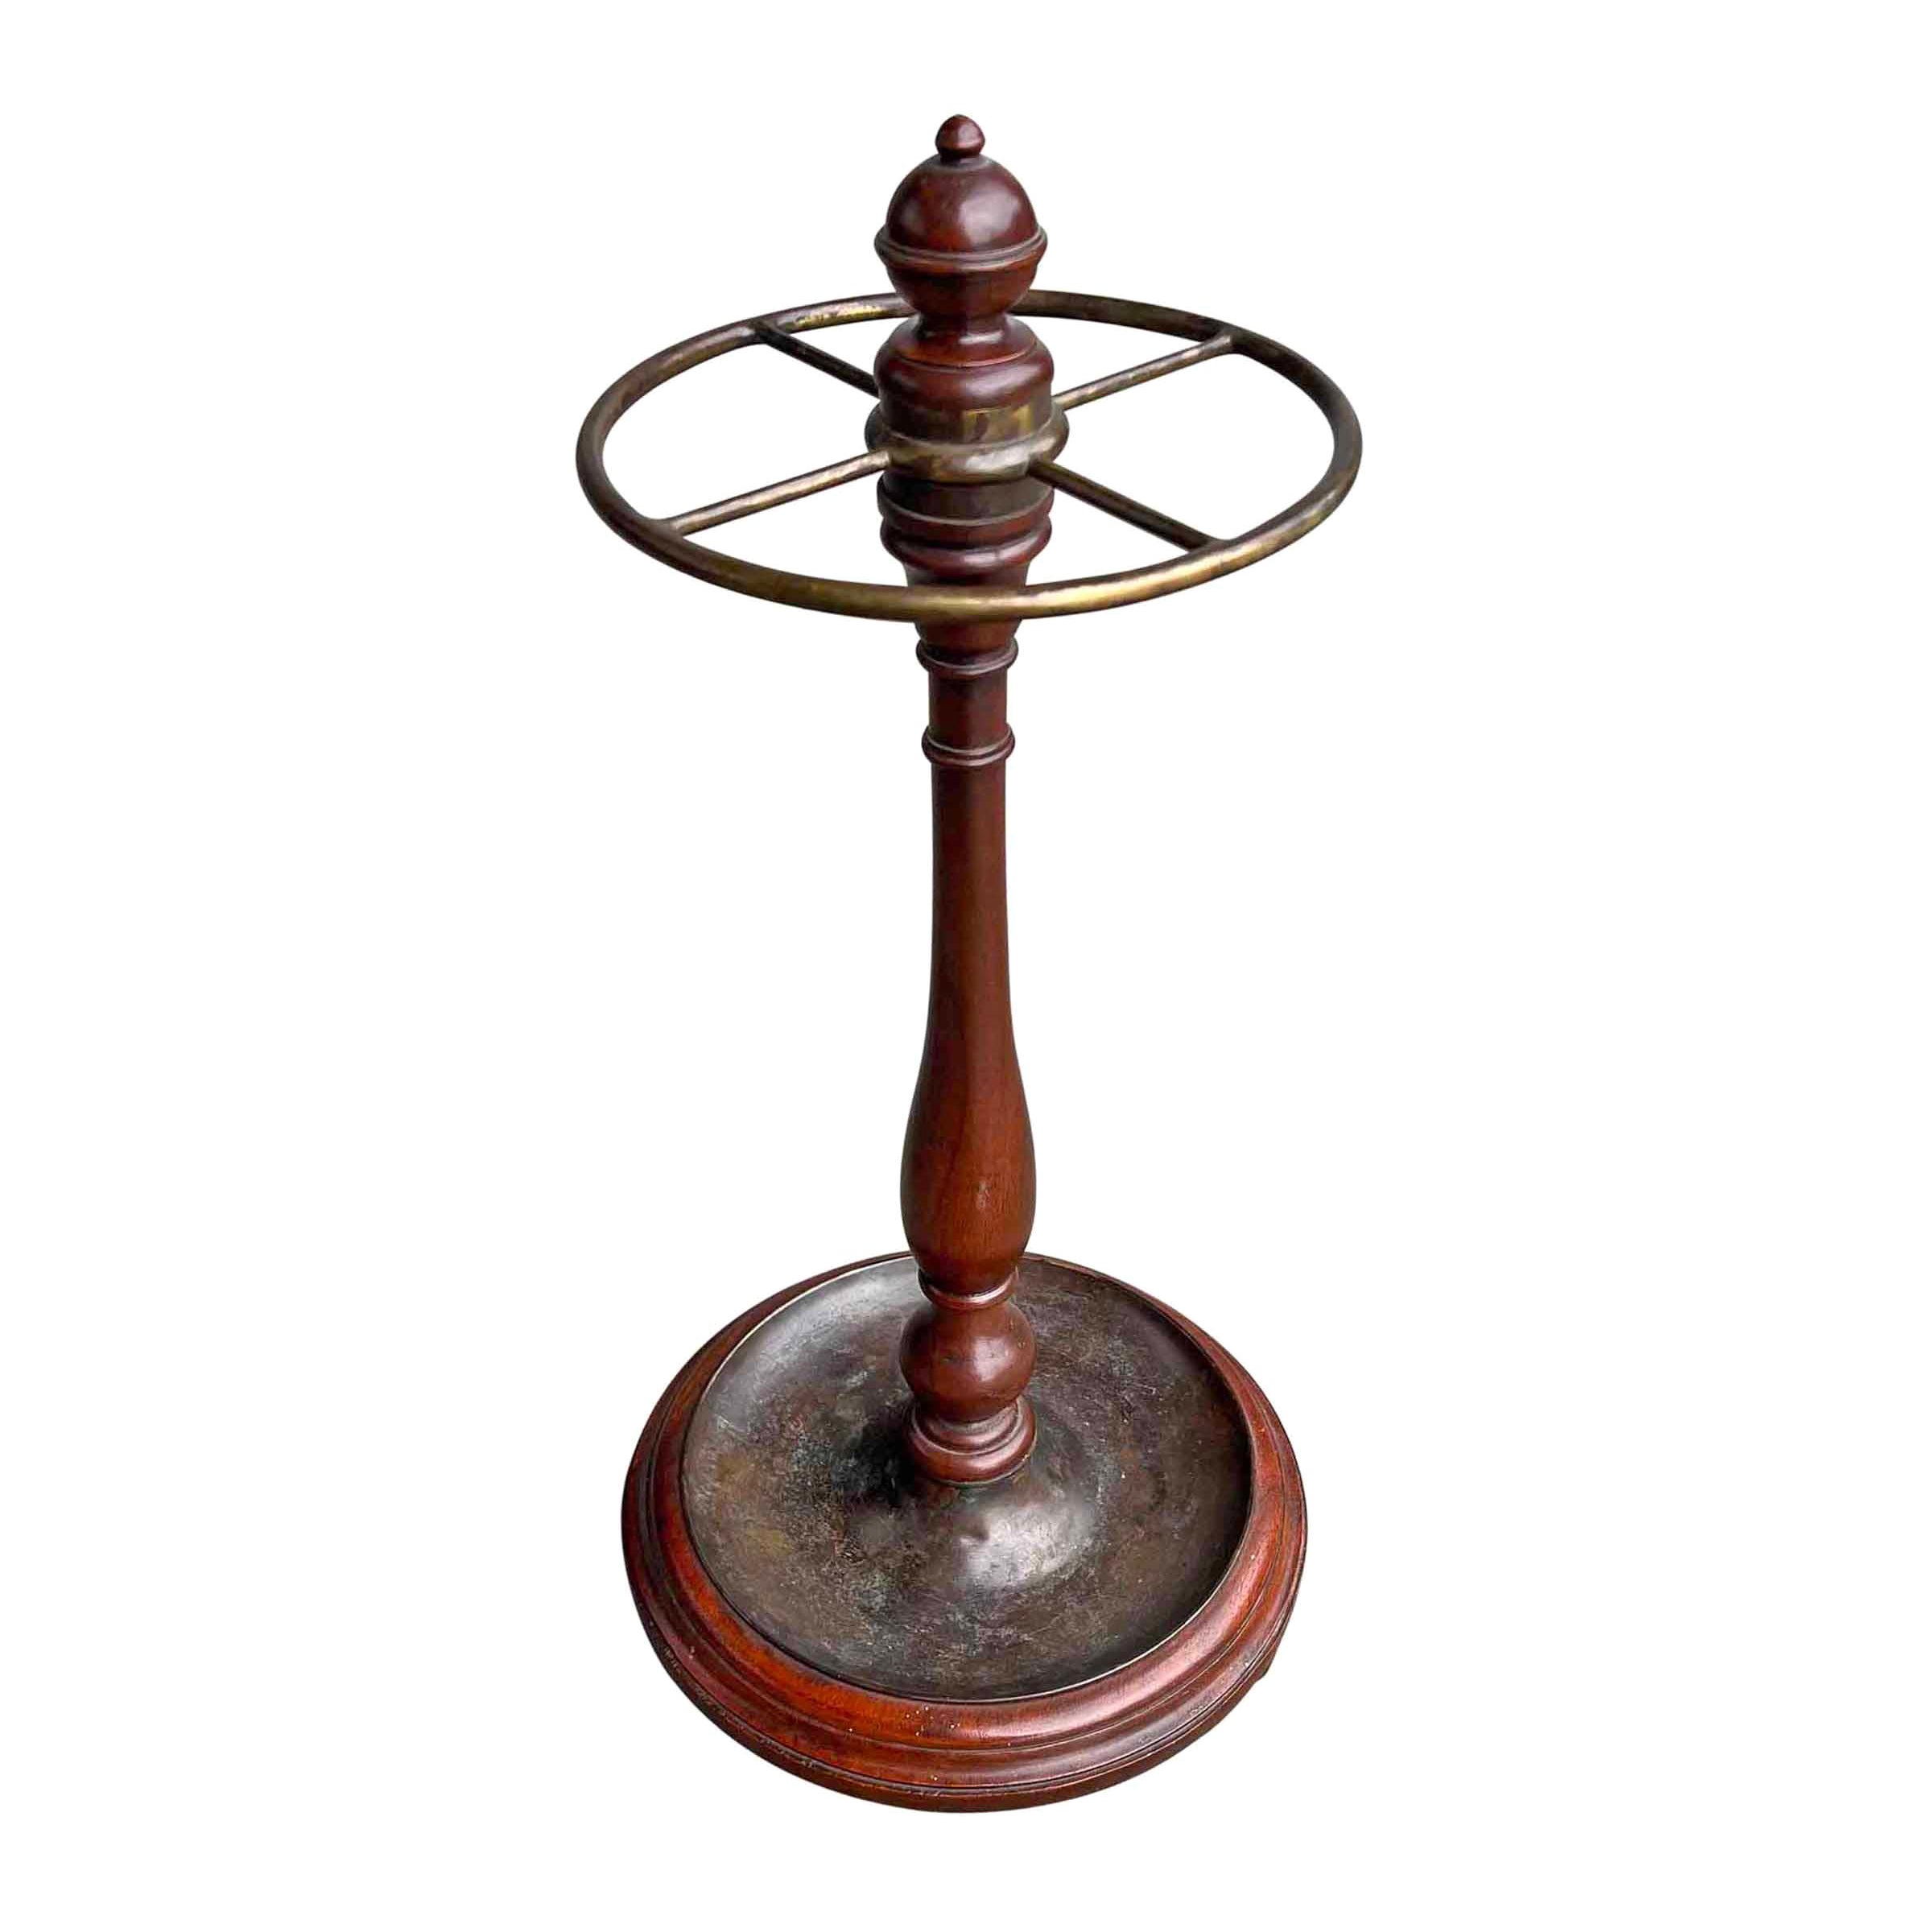 Early 20th Century English Umbrella Stand For Sale